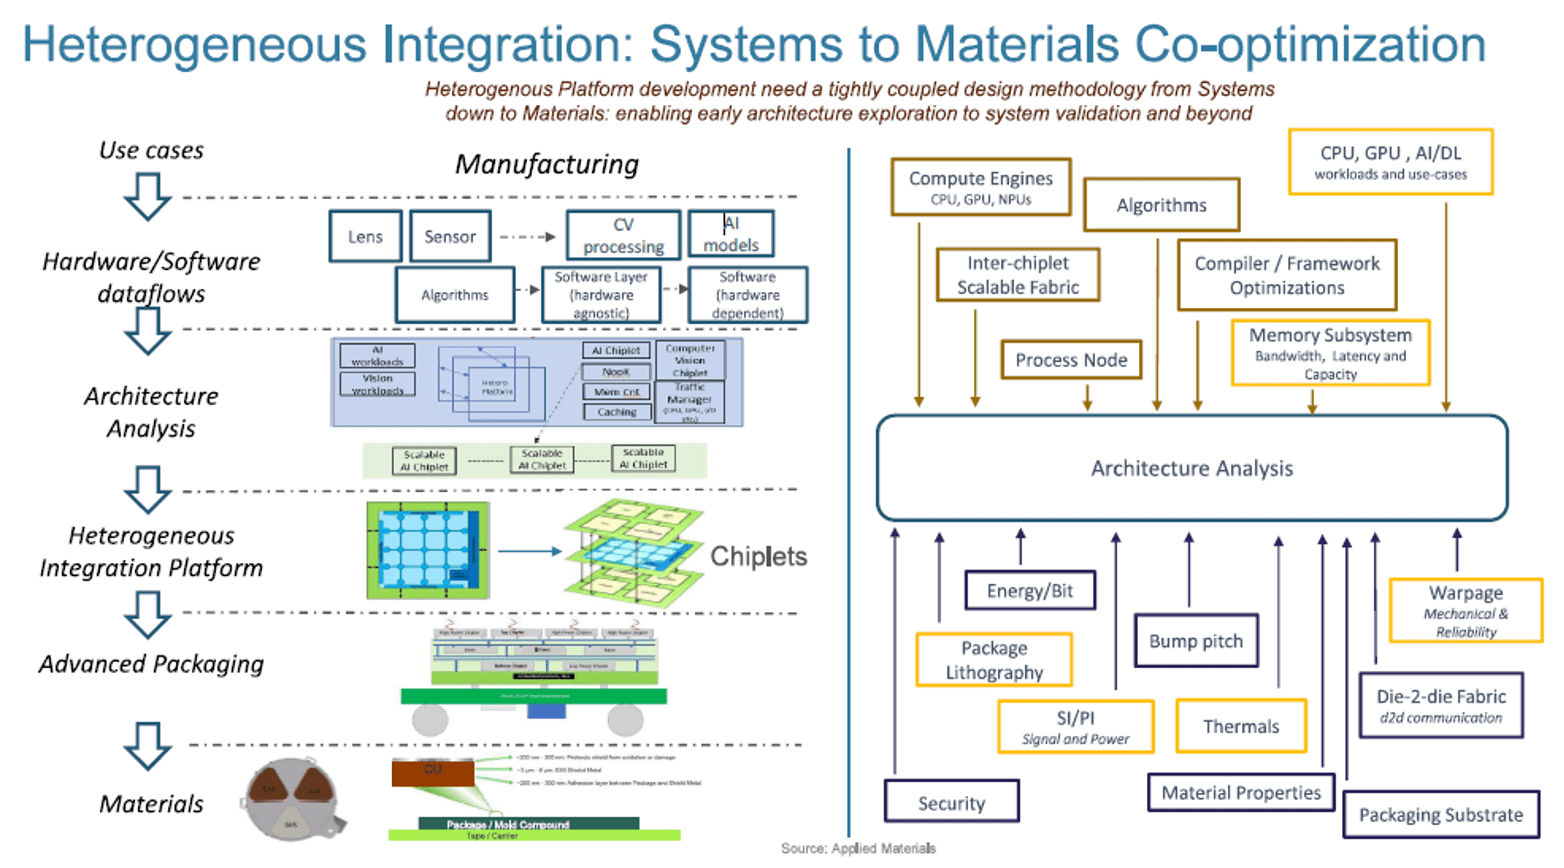 Fig. 2: Integrated platform development requires tightly coupled architectural analysis that co-optimizes the system design to architecture to assembly process and packaging material selections. Source: Applied Materials